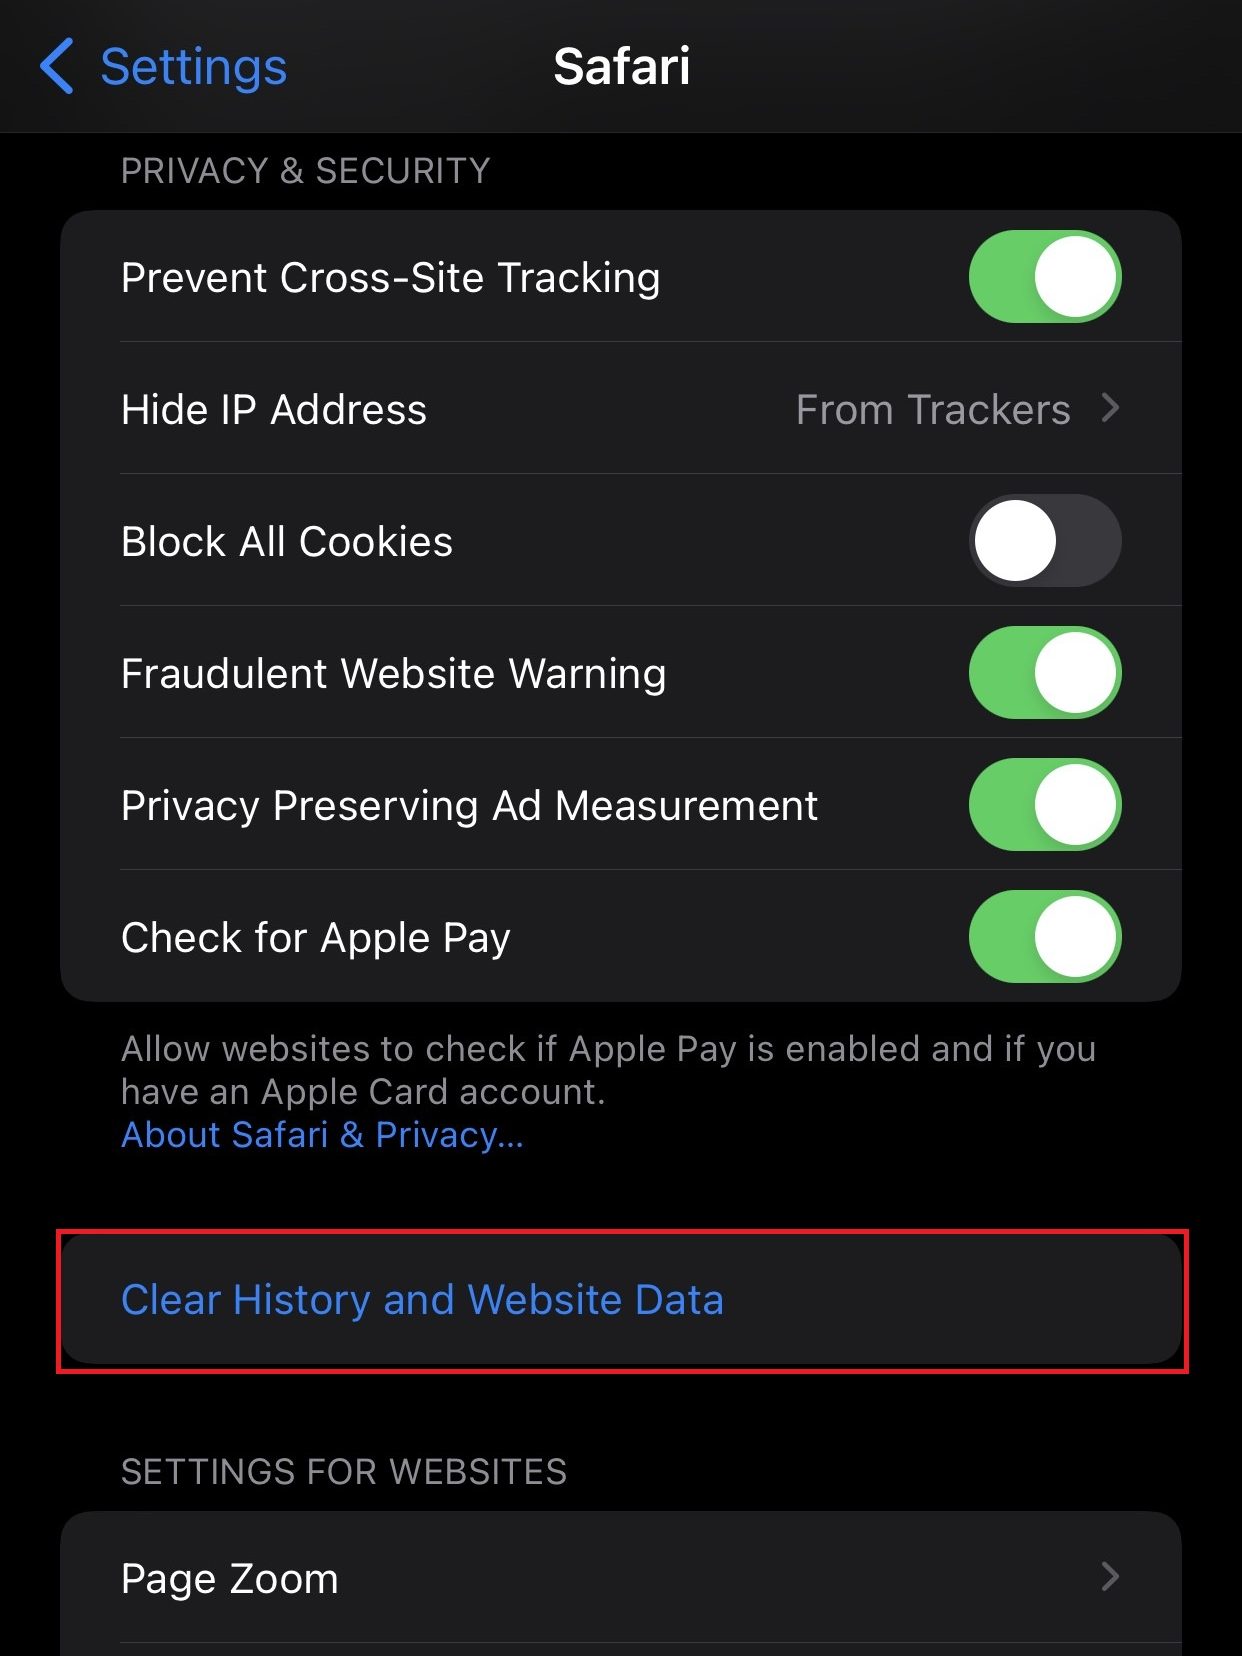 Tap Clear History and Website Data to clear Safari cache